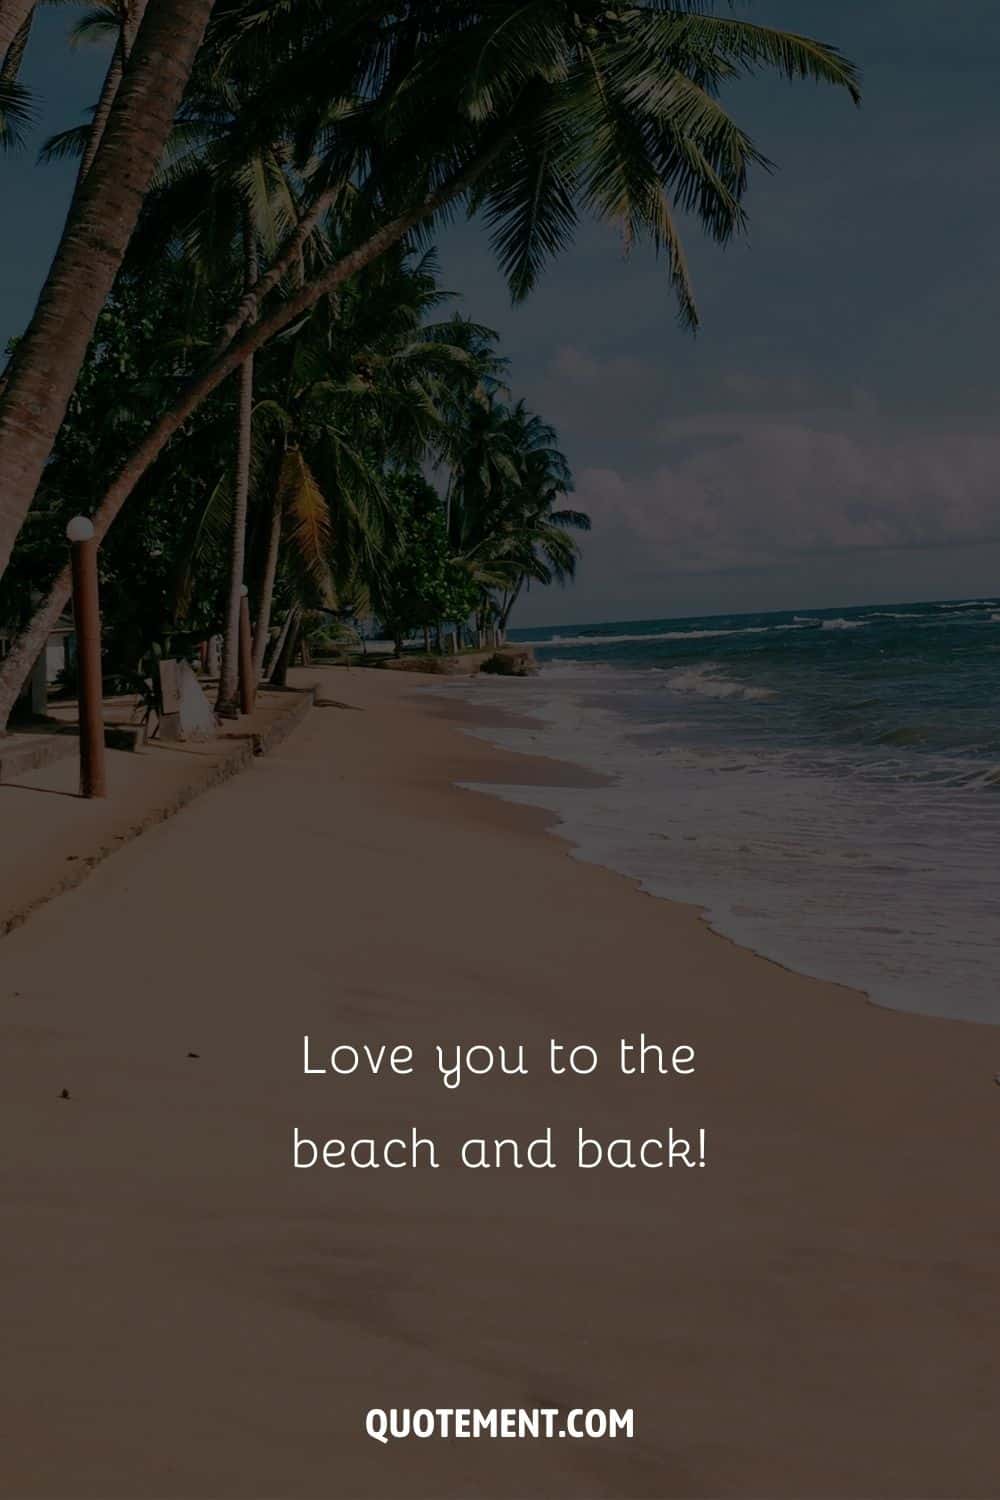 Love you to the beach and back! – Unknown